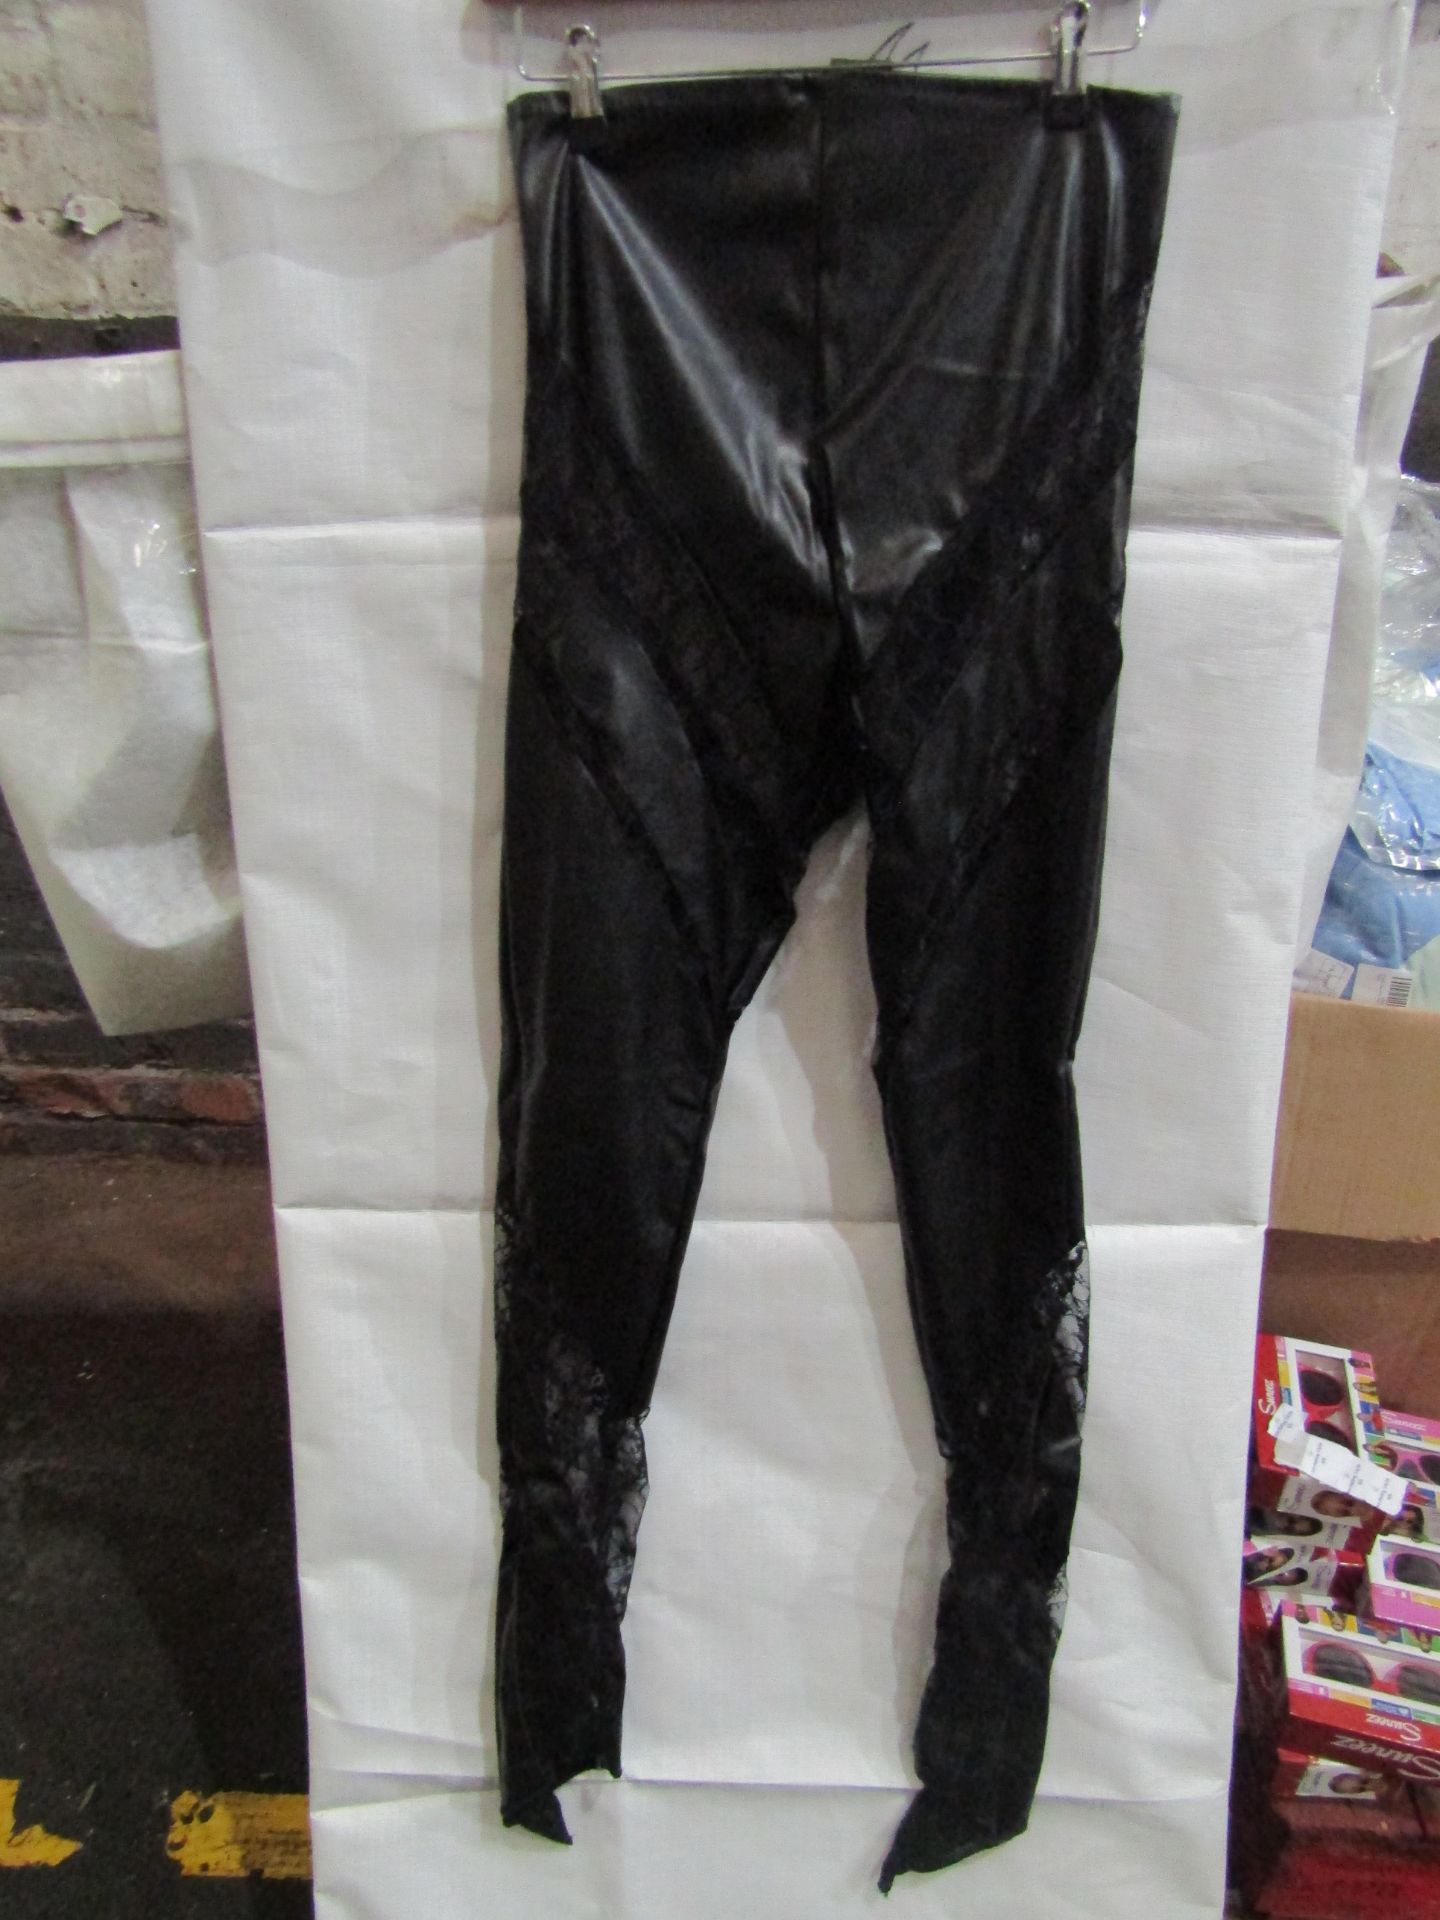 5x Pretty Little Thing Shape Black Faux Leather Lace Insert Leggings, Size 10, New & Packaged.